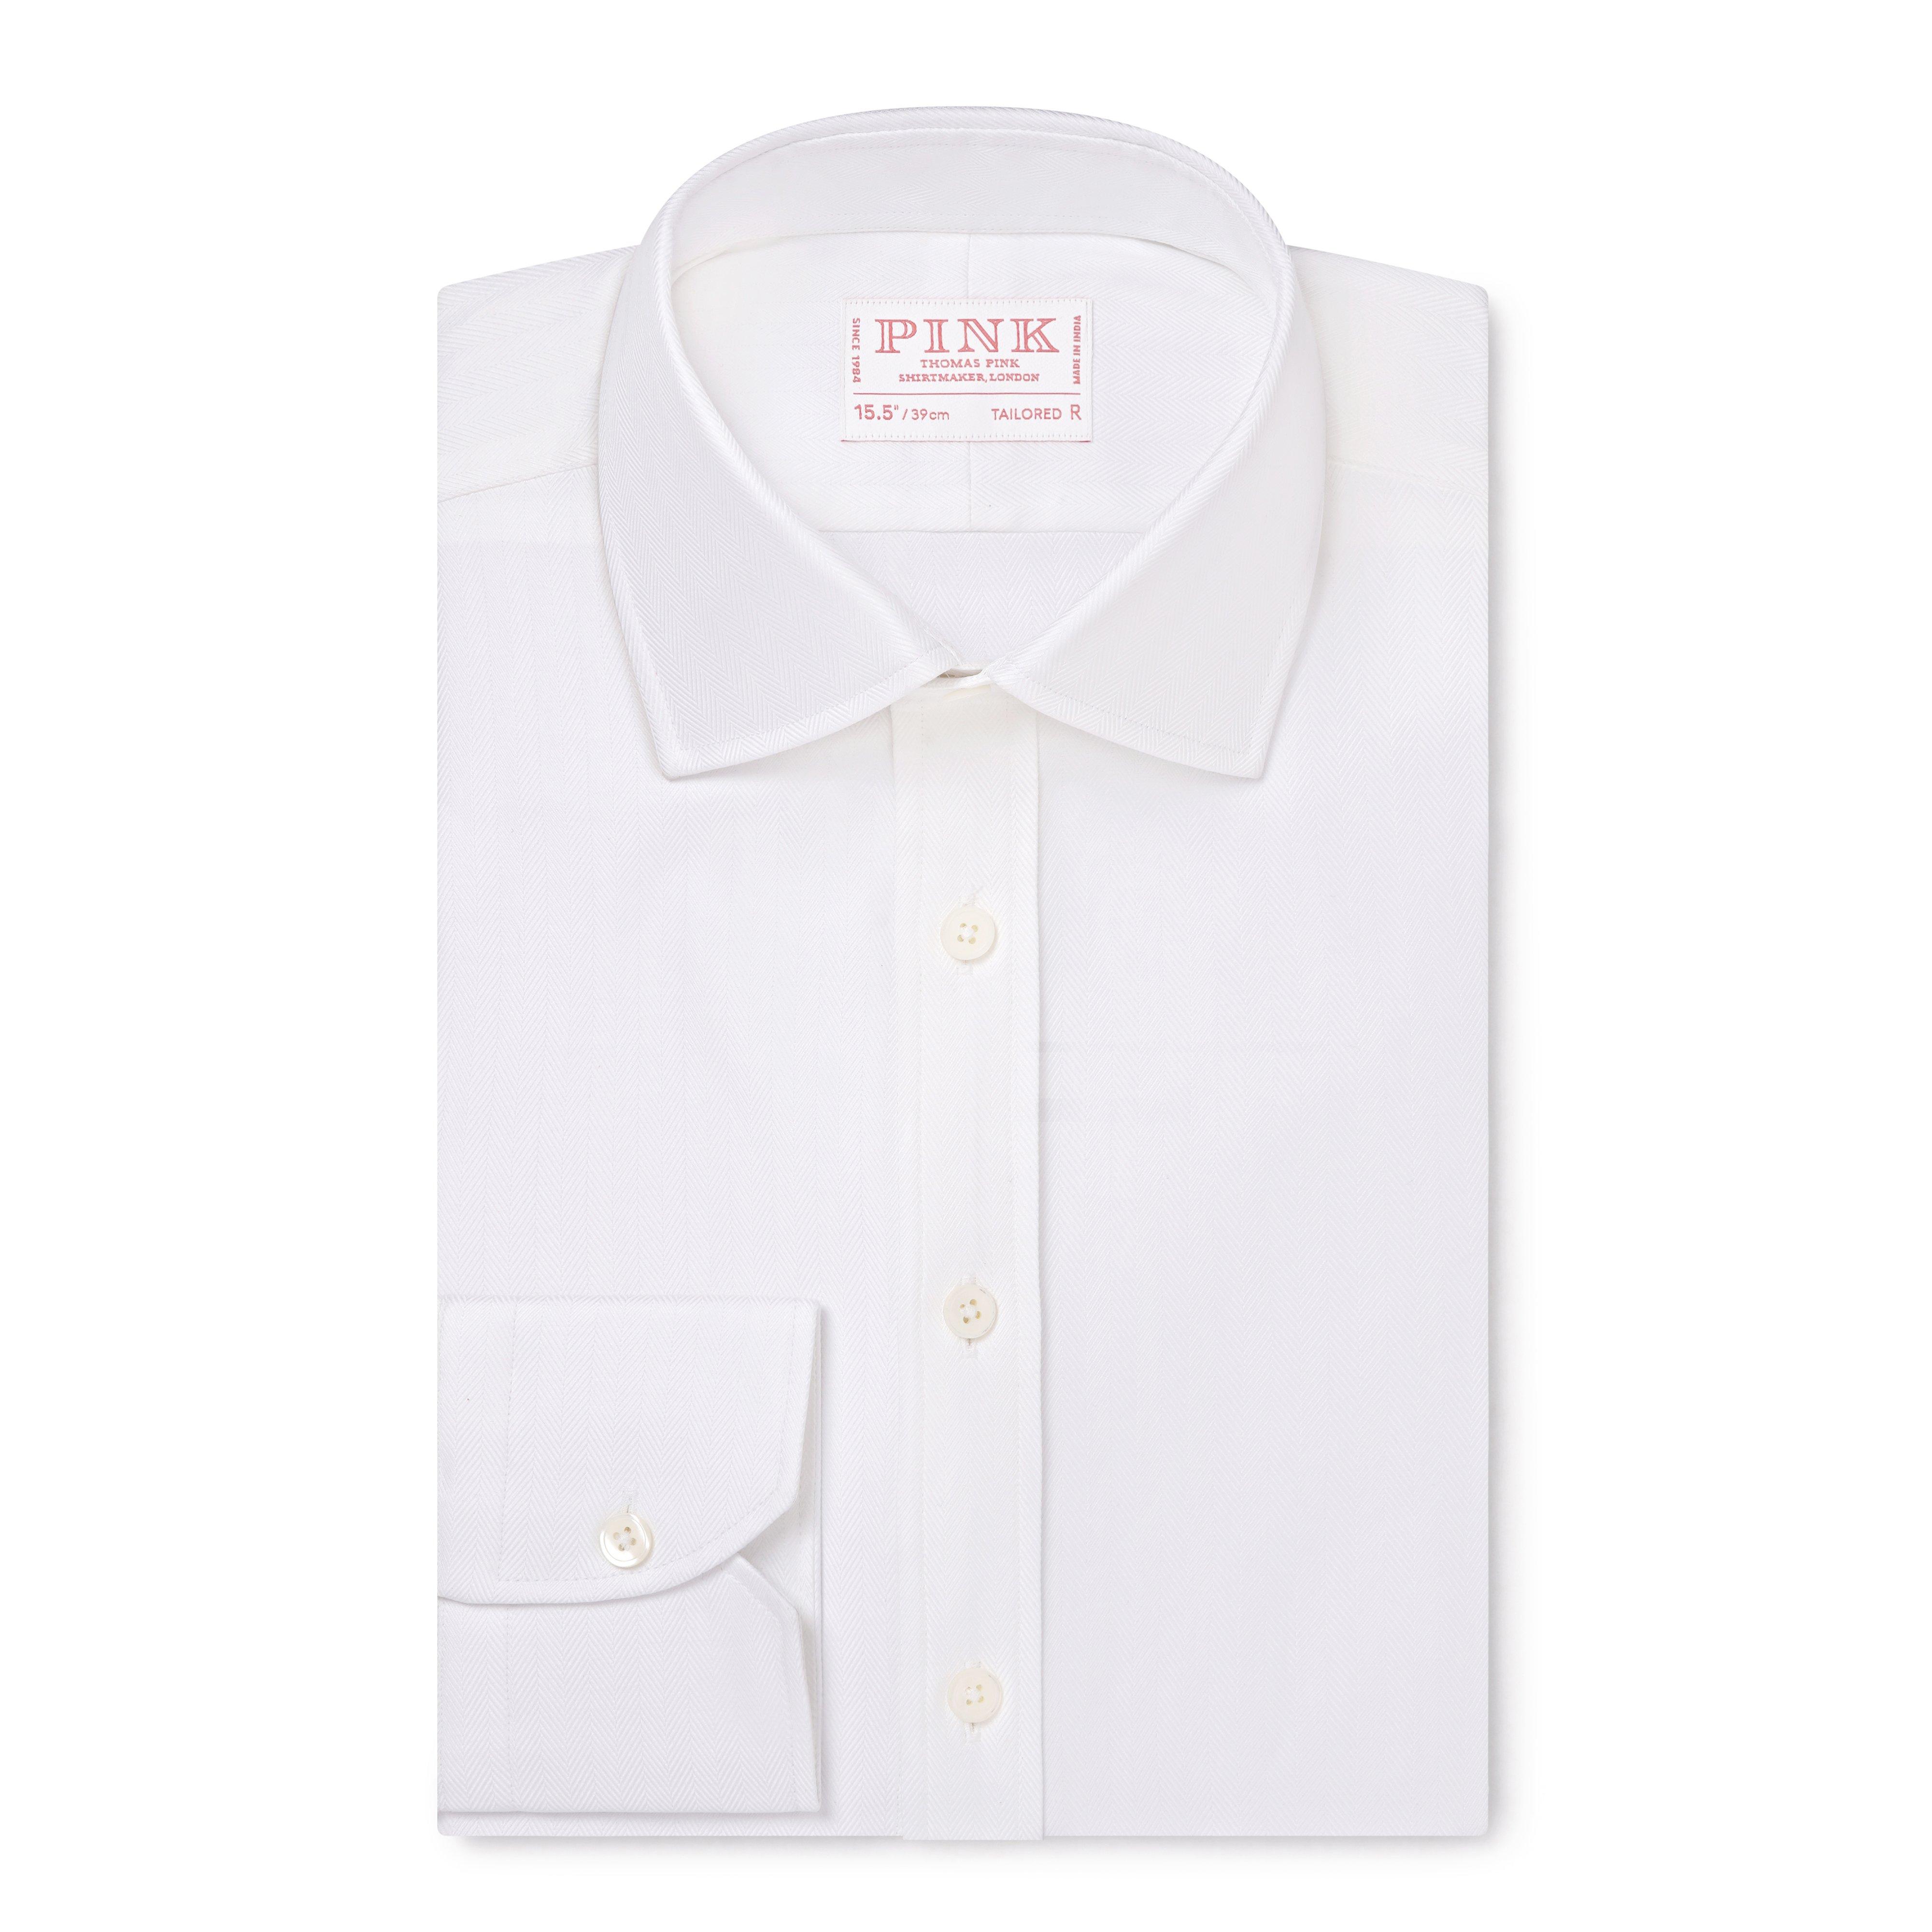 Thomas Pink refocuses shirt business with new price structure